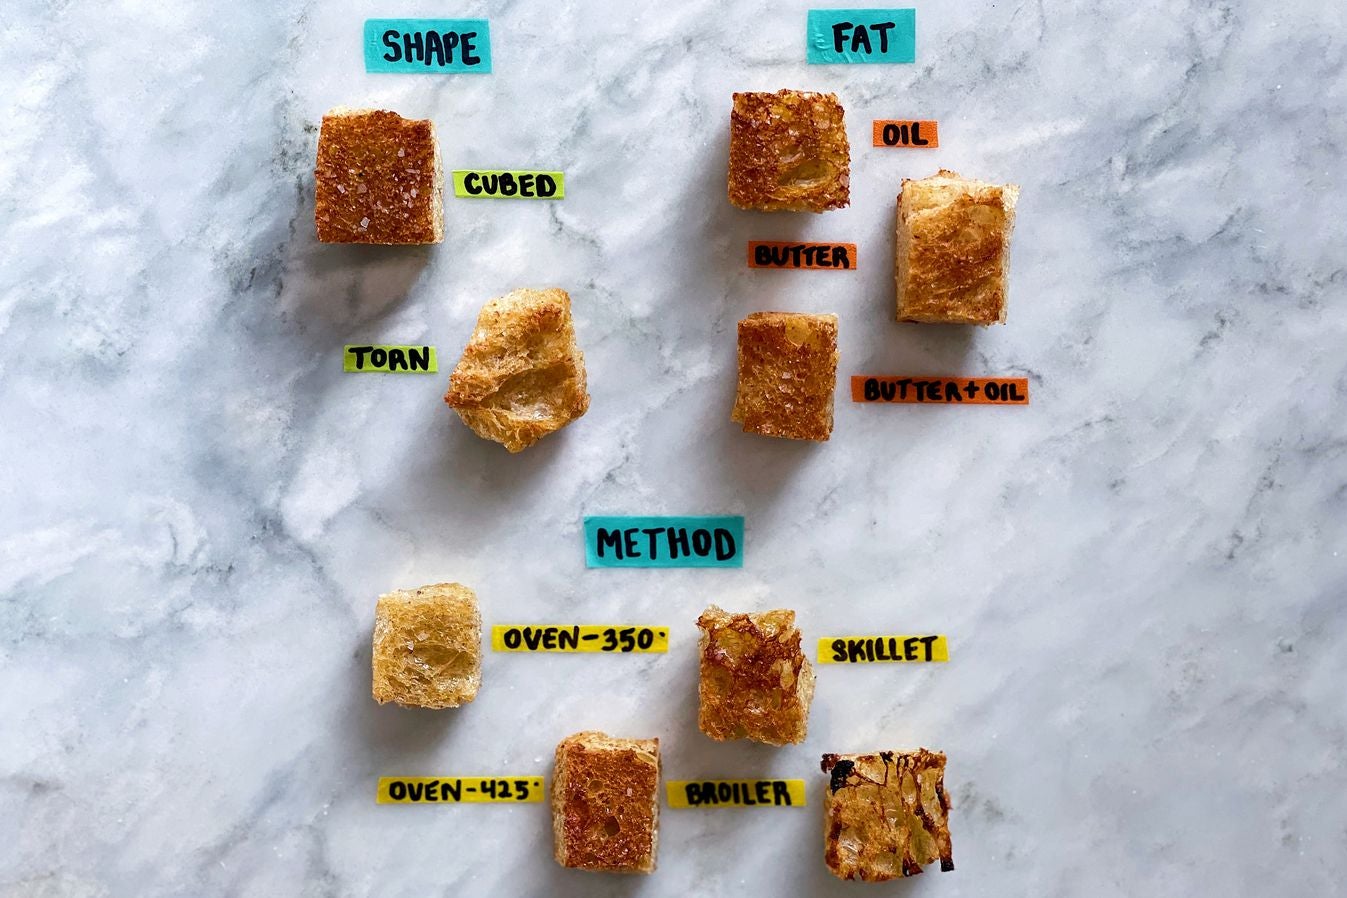 Nine croutons labeled by cooking method, spread out on a marble surface